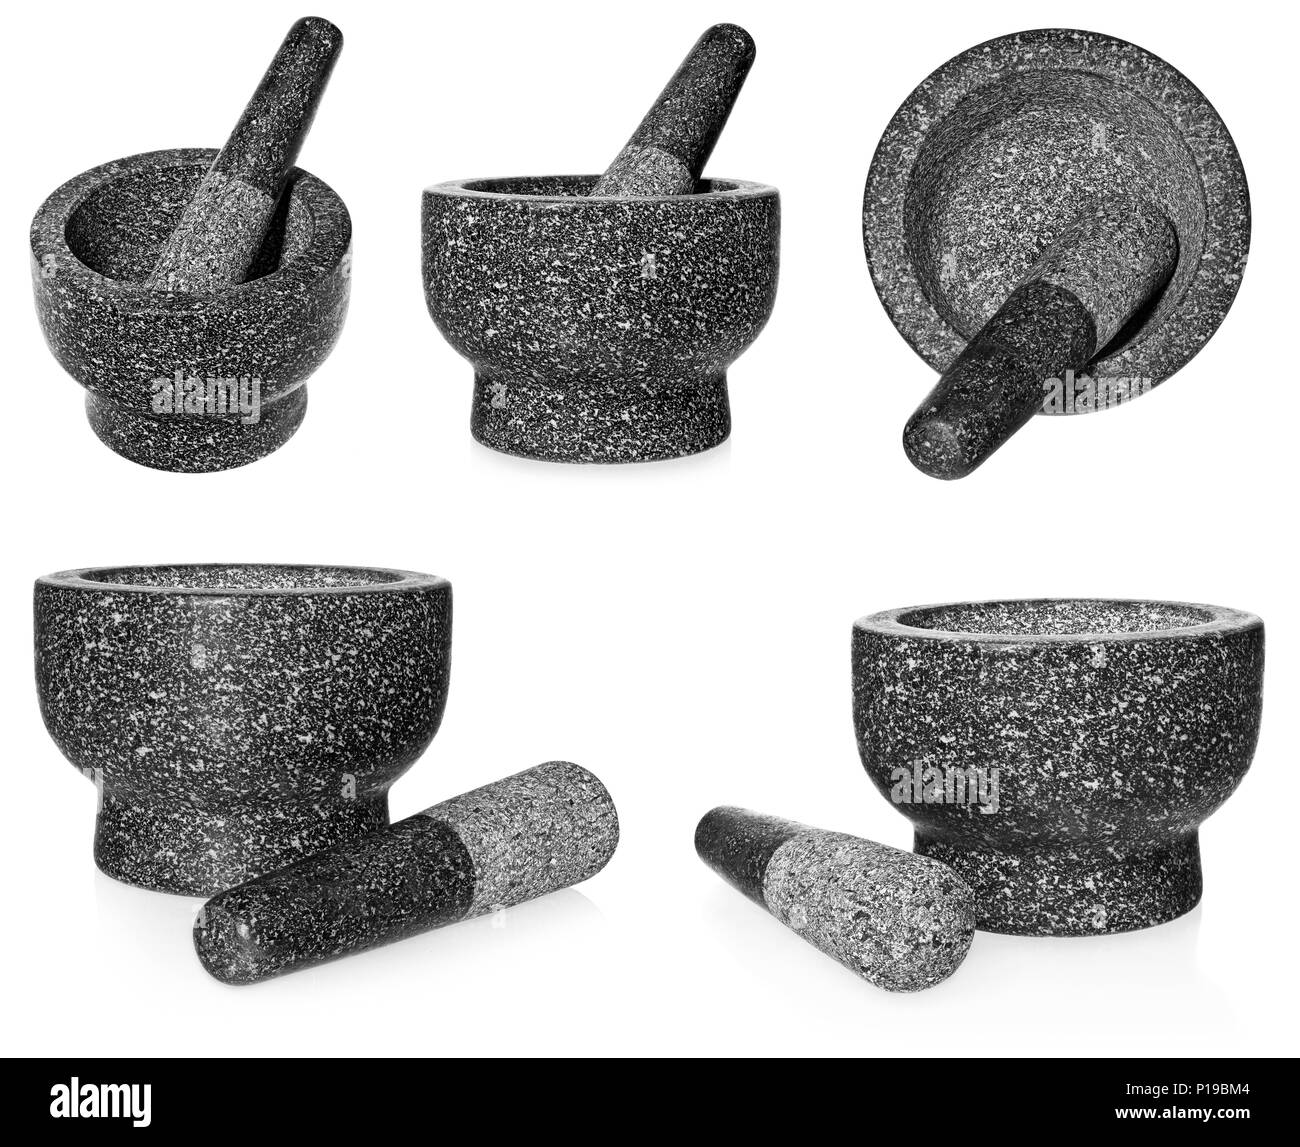 Granite mortar with pestle. Empty crushing dish, isolated on a white background. Stock Photo